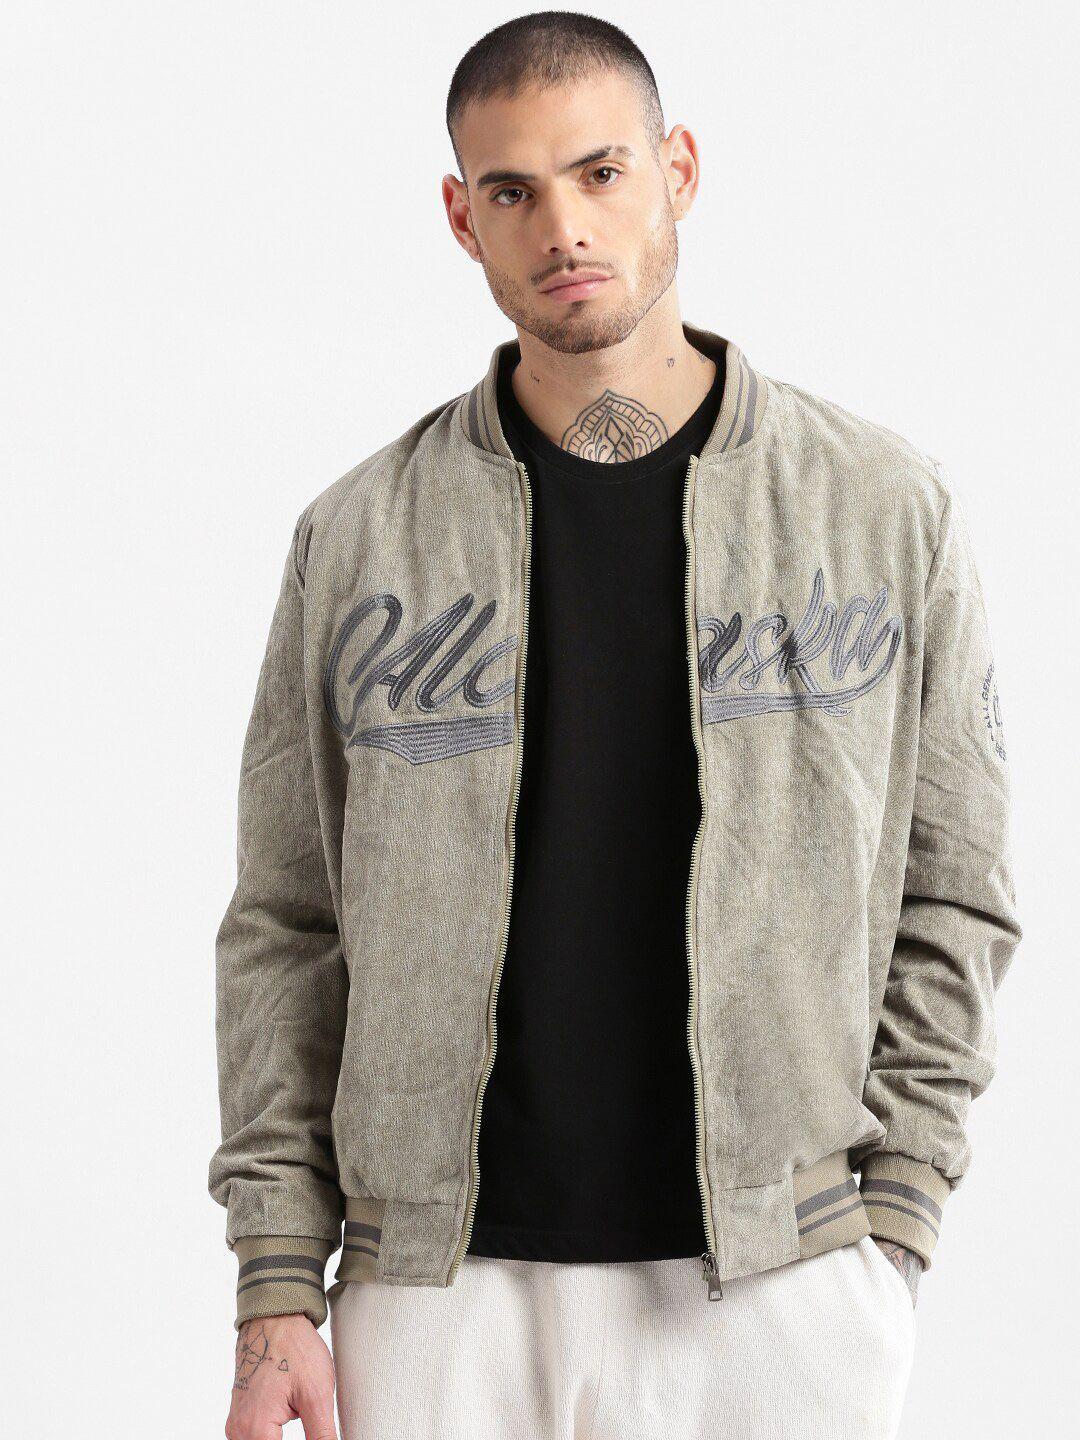 showoff typography printed stand collar windcheater fleece bomber jacket